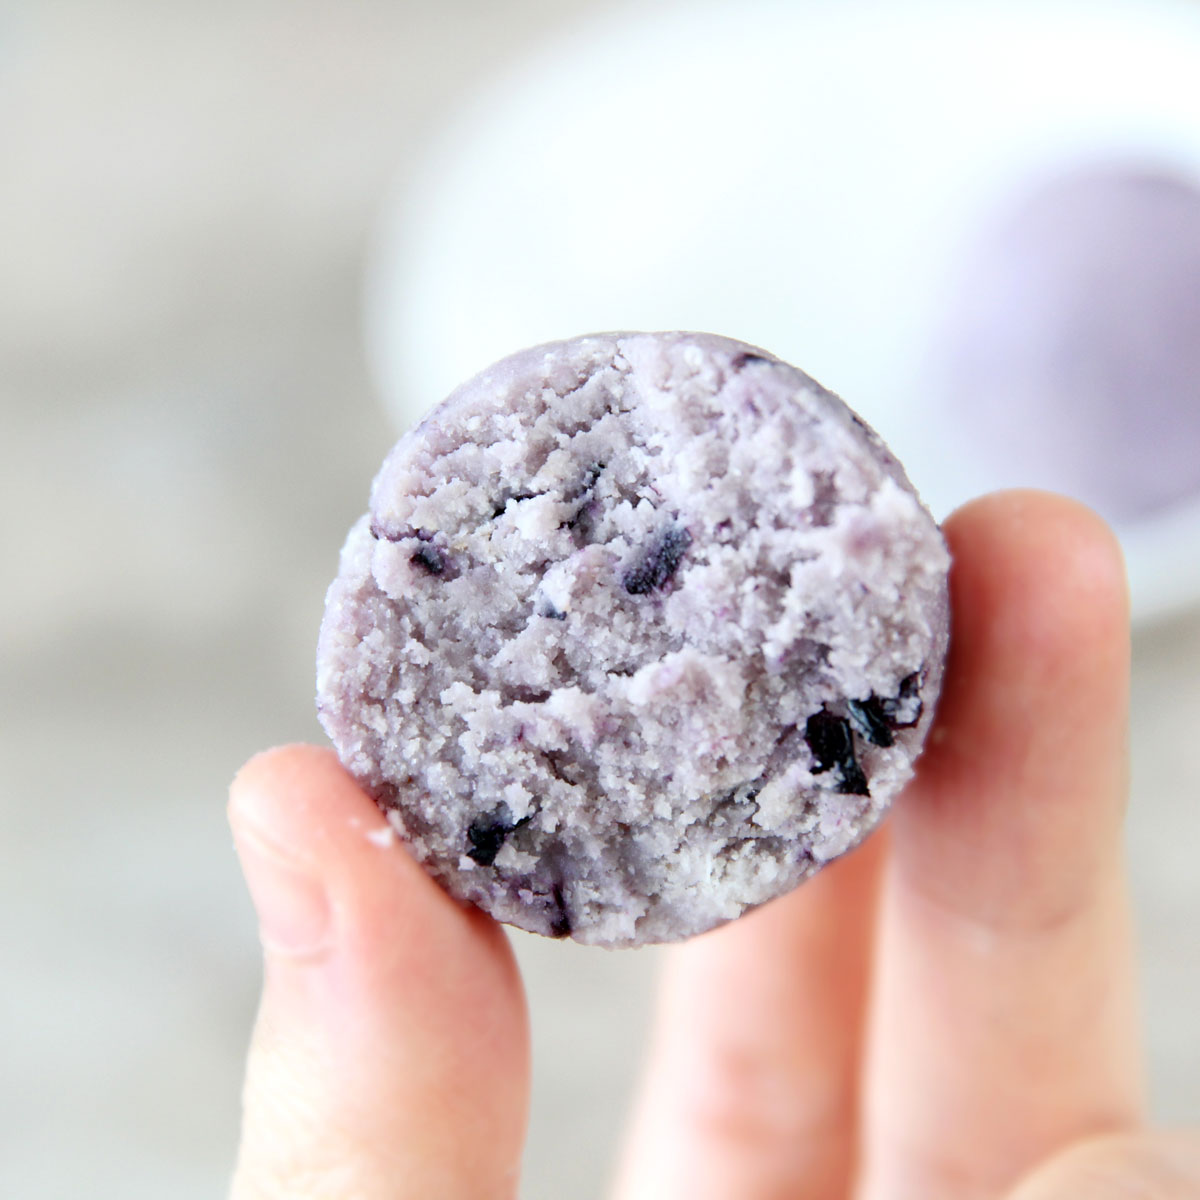 Blueberry Cheesecake Protein Balls Recipe (Healthy Low Carb Energy Bites) - Sweet Potatoes in the Microwave